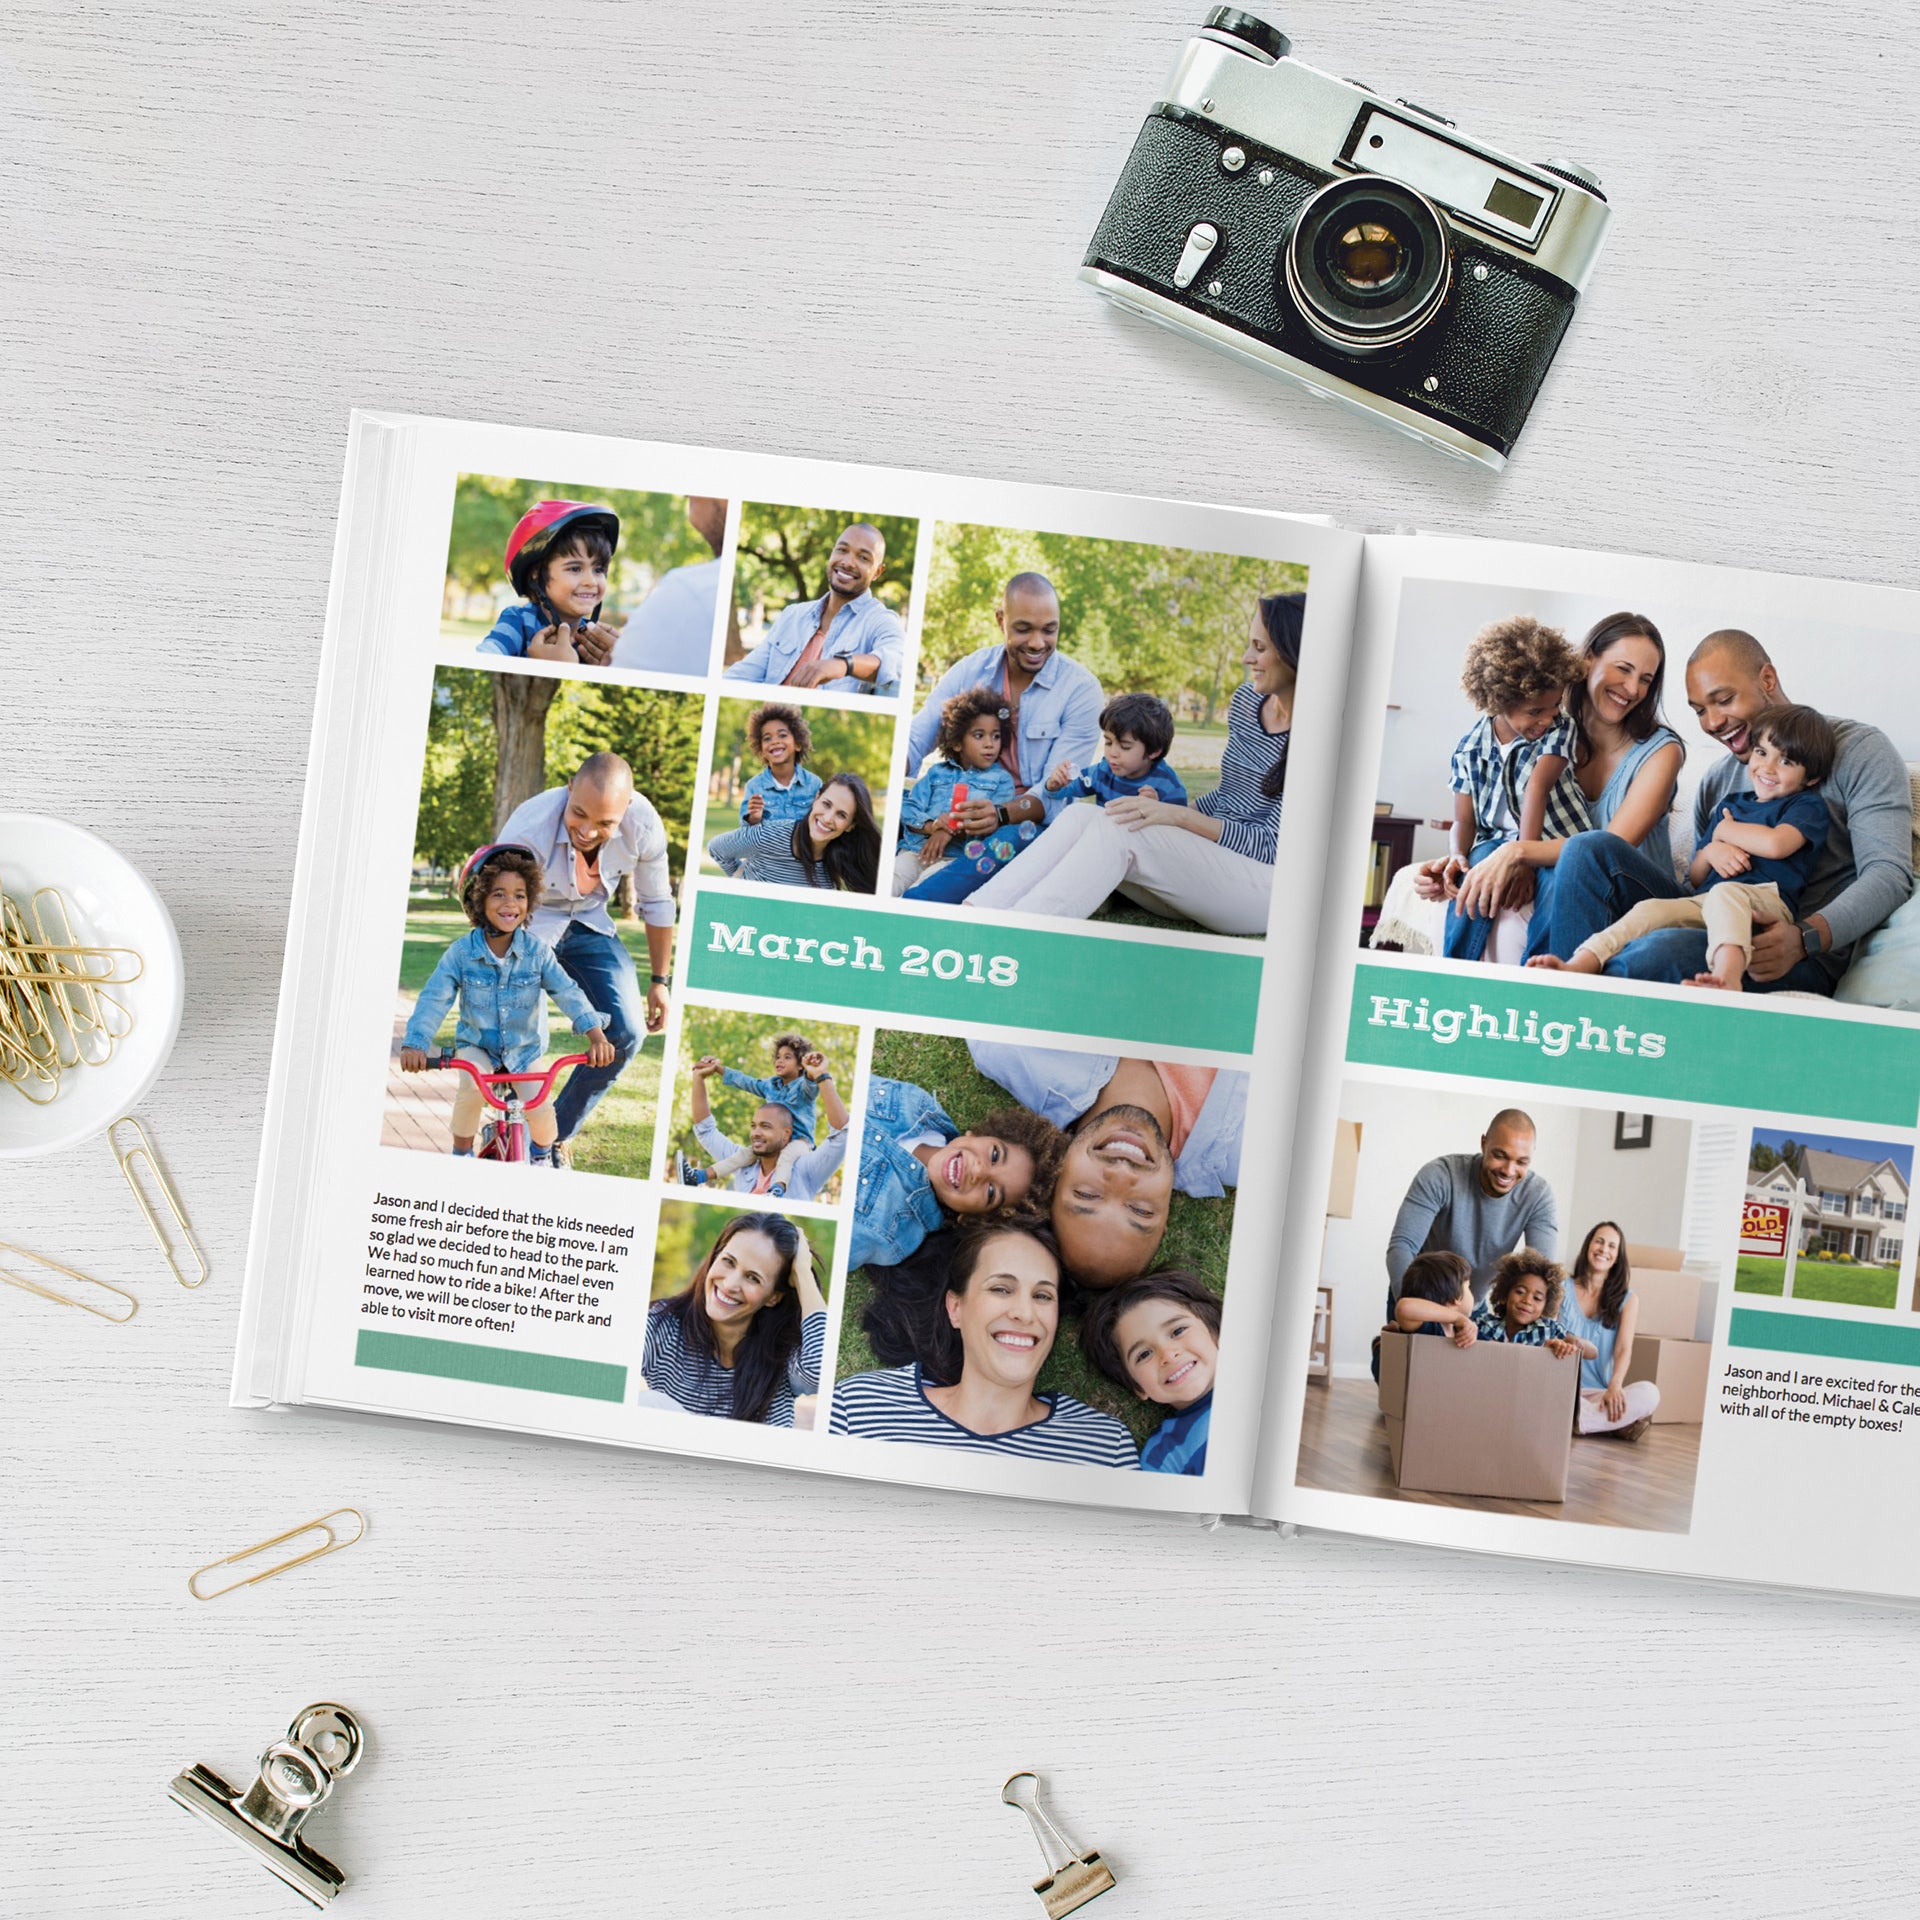 Create your own projects using digital art by Lucky Girl Creative and print photo books, wall décor, cards, & more! As recommended by Lucky Girl Creative digital art.